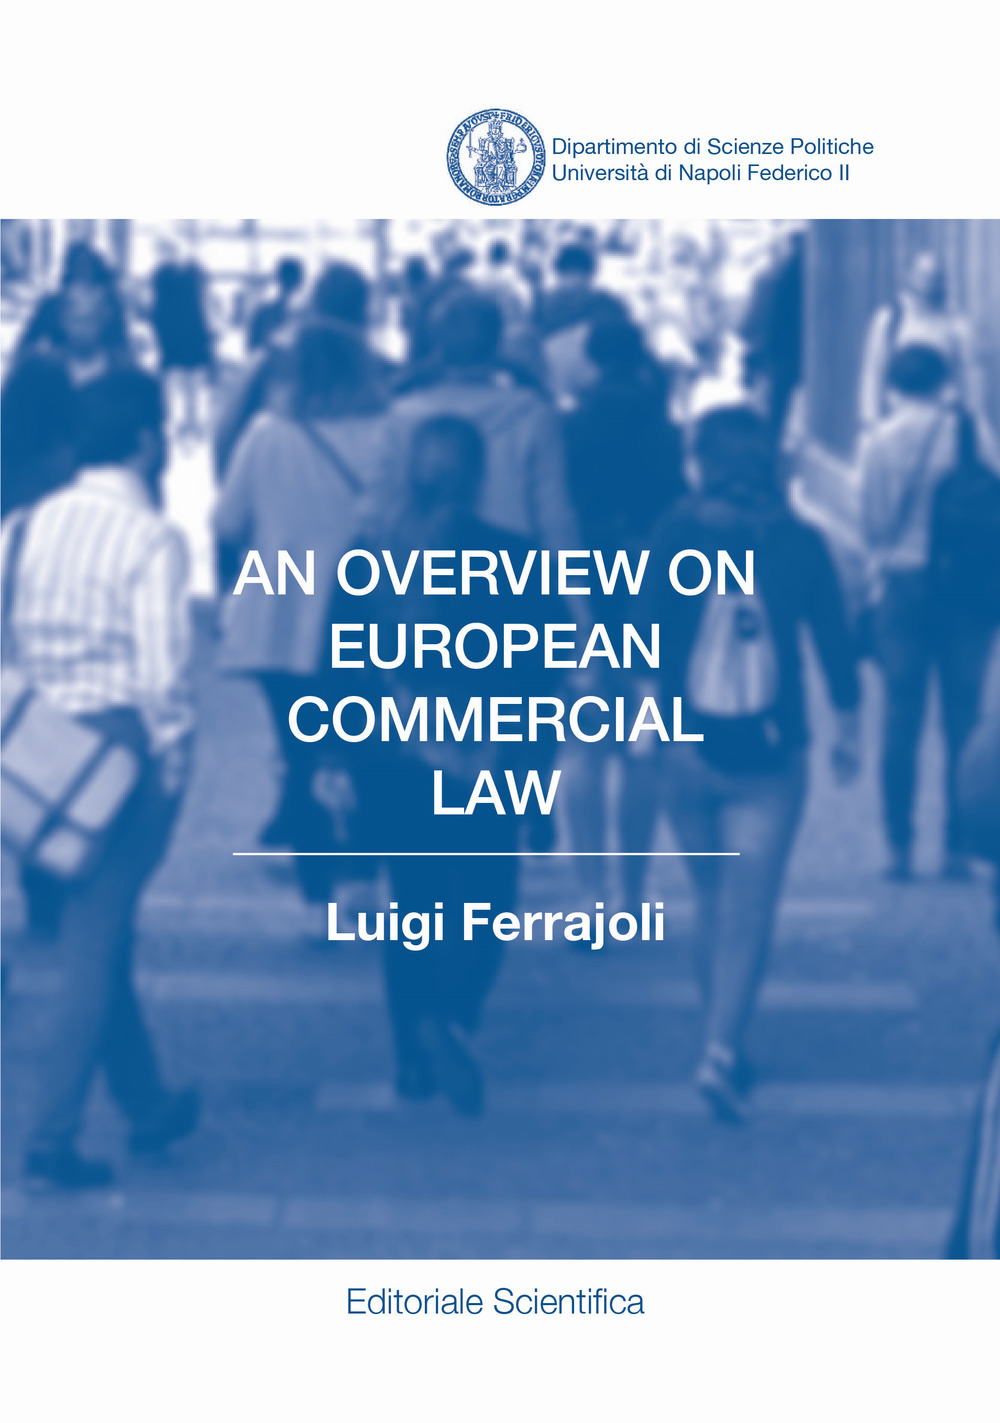 An overview on European commercial law